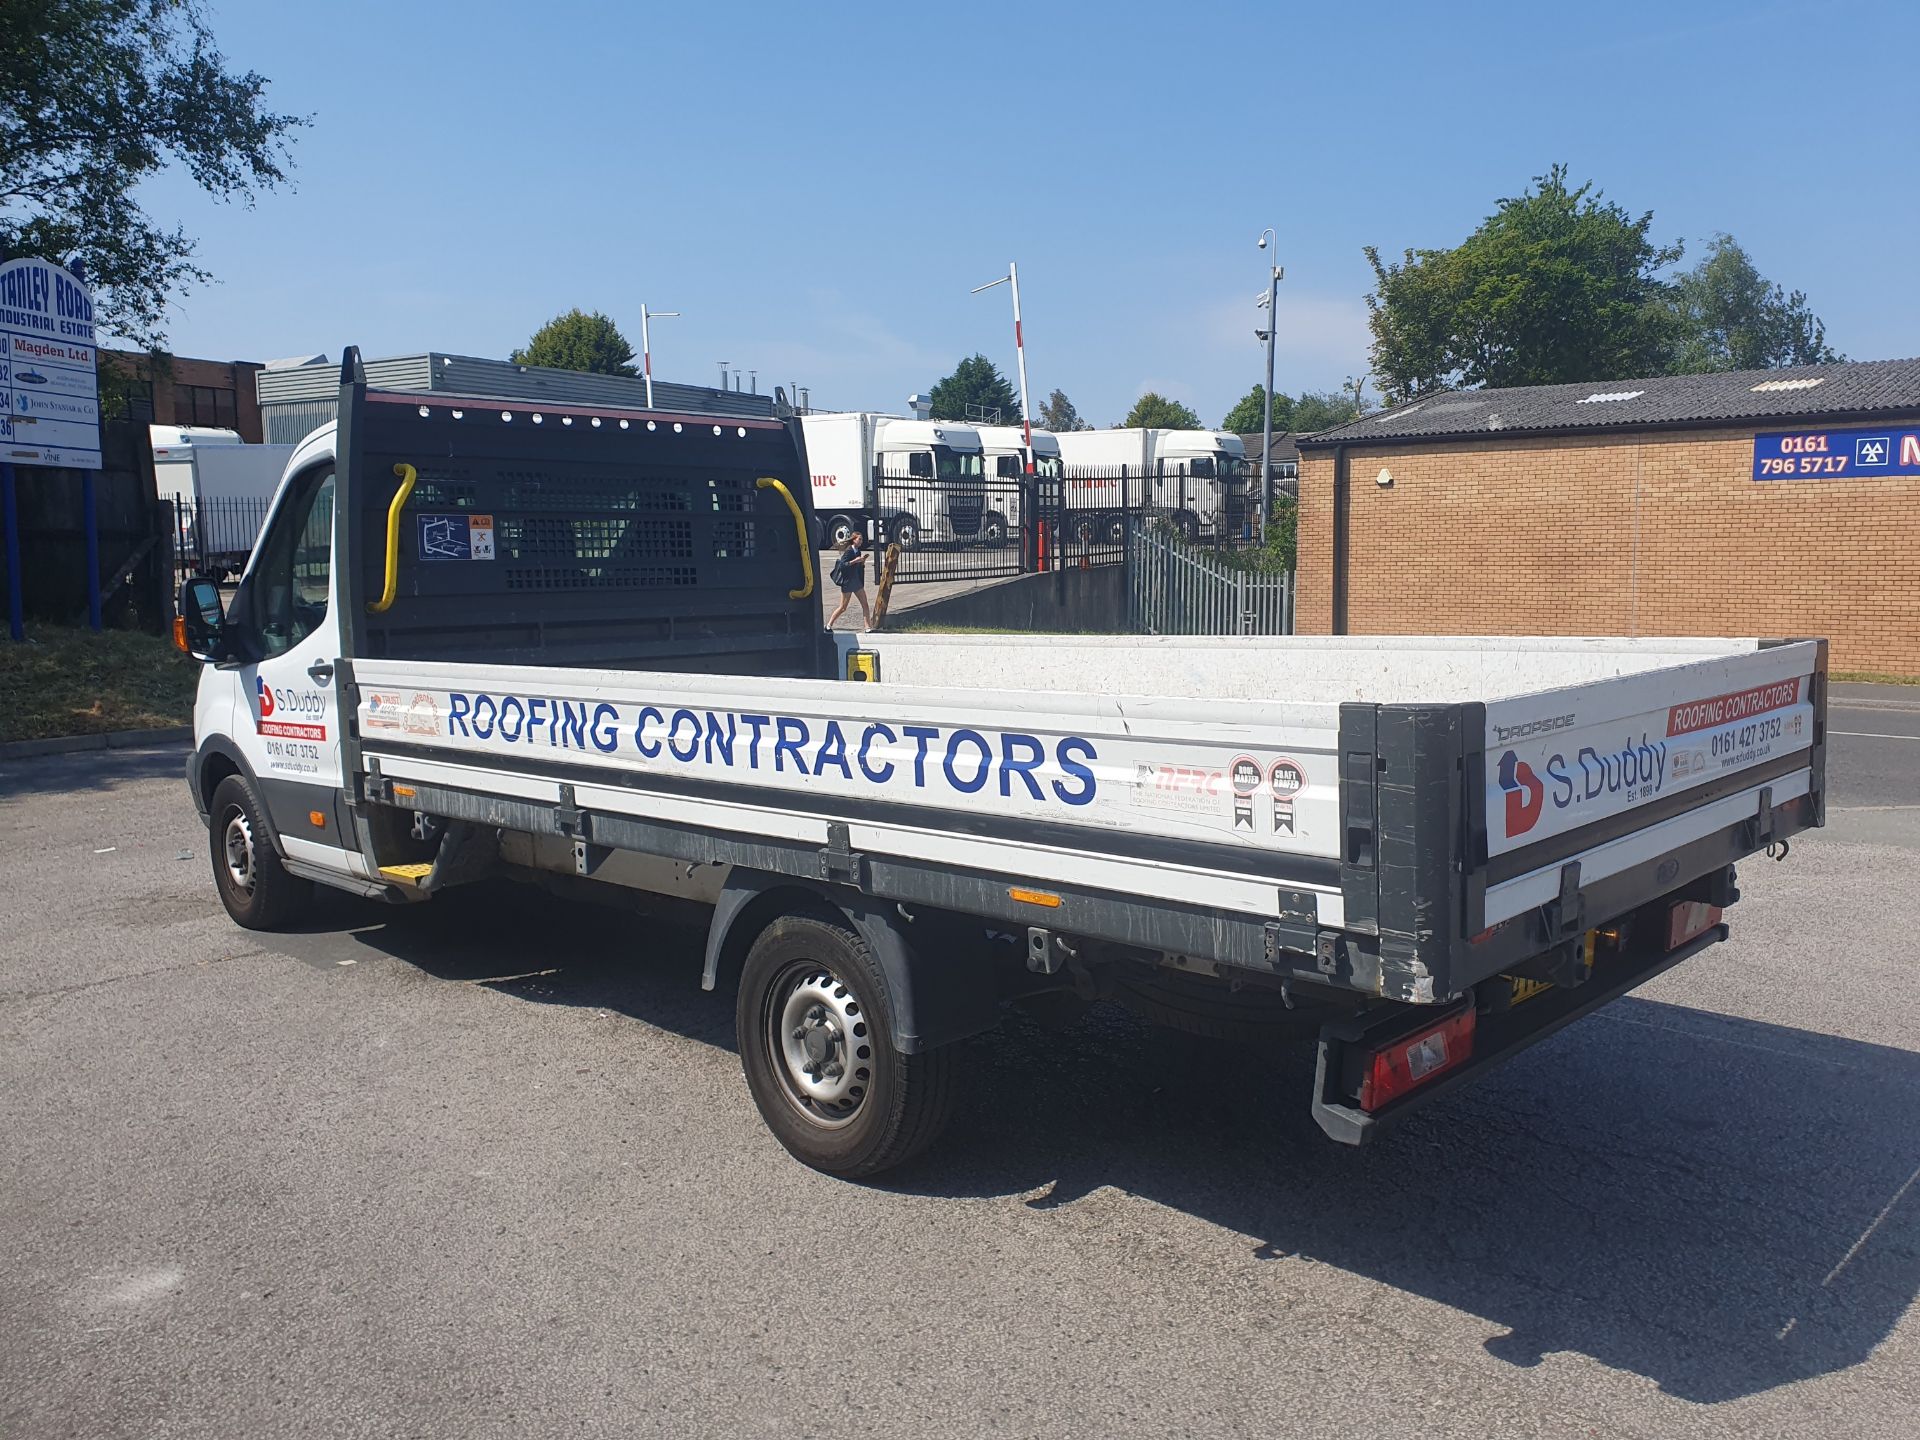 Ford Transit 350 Dropside Lorry | Reg: DY18 DCV | Mileage: 56,638 - Image 4 of 16